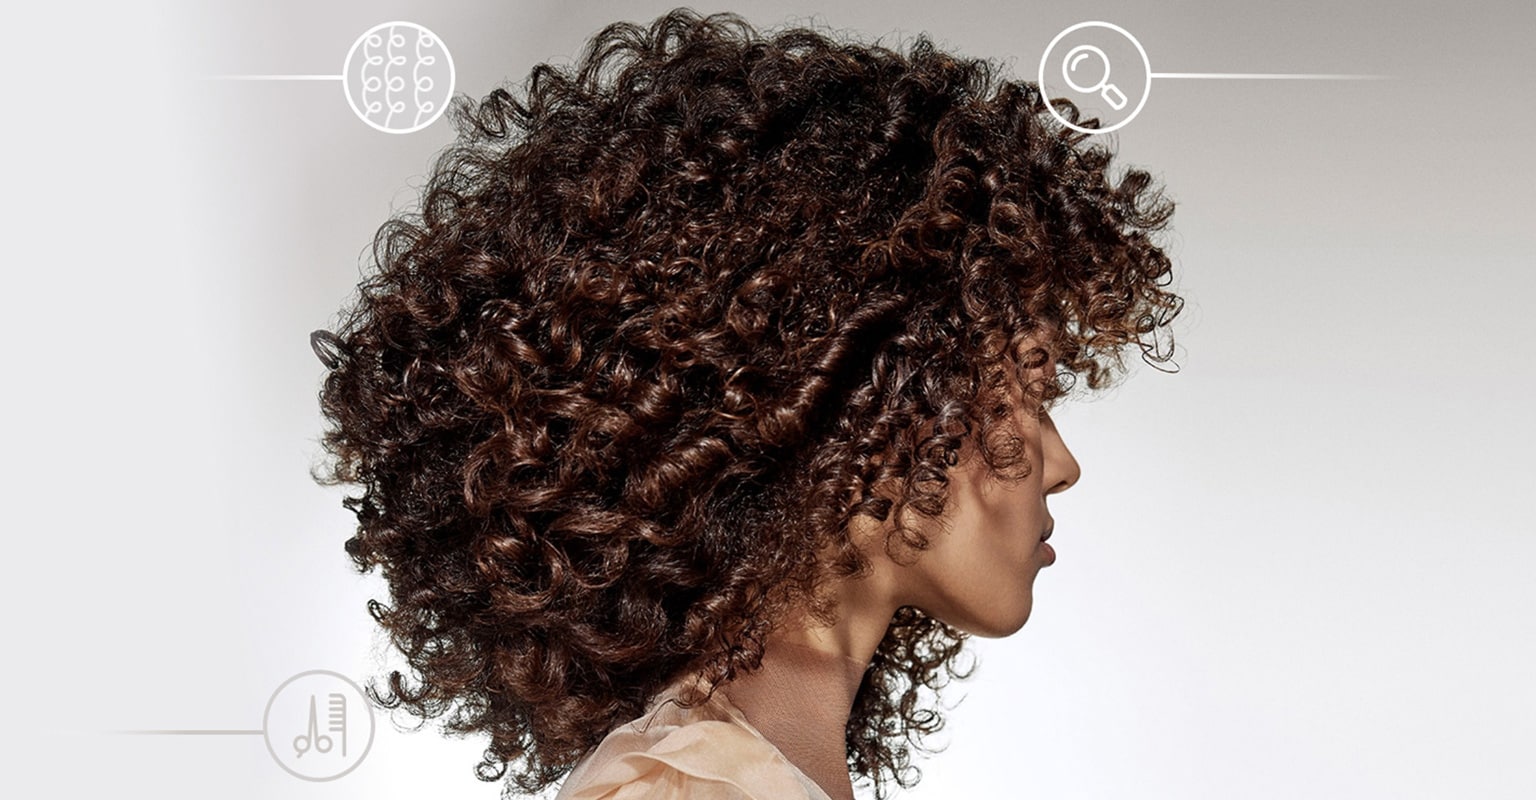 Customize your hair care - take Aveda's Hair Quiz